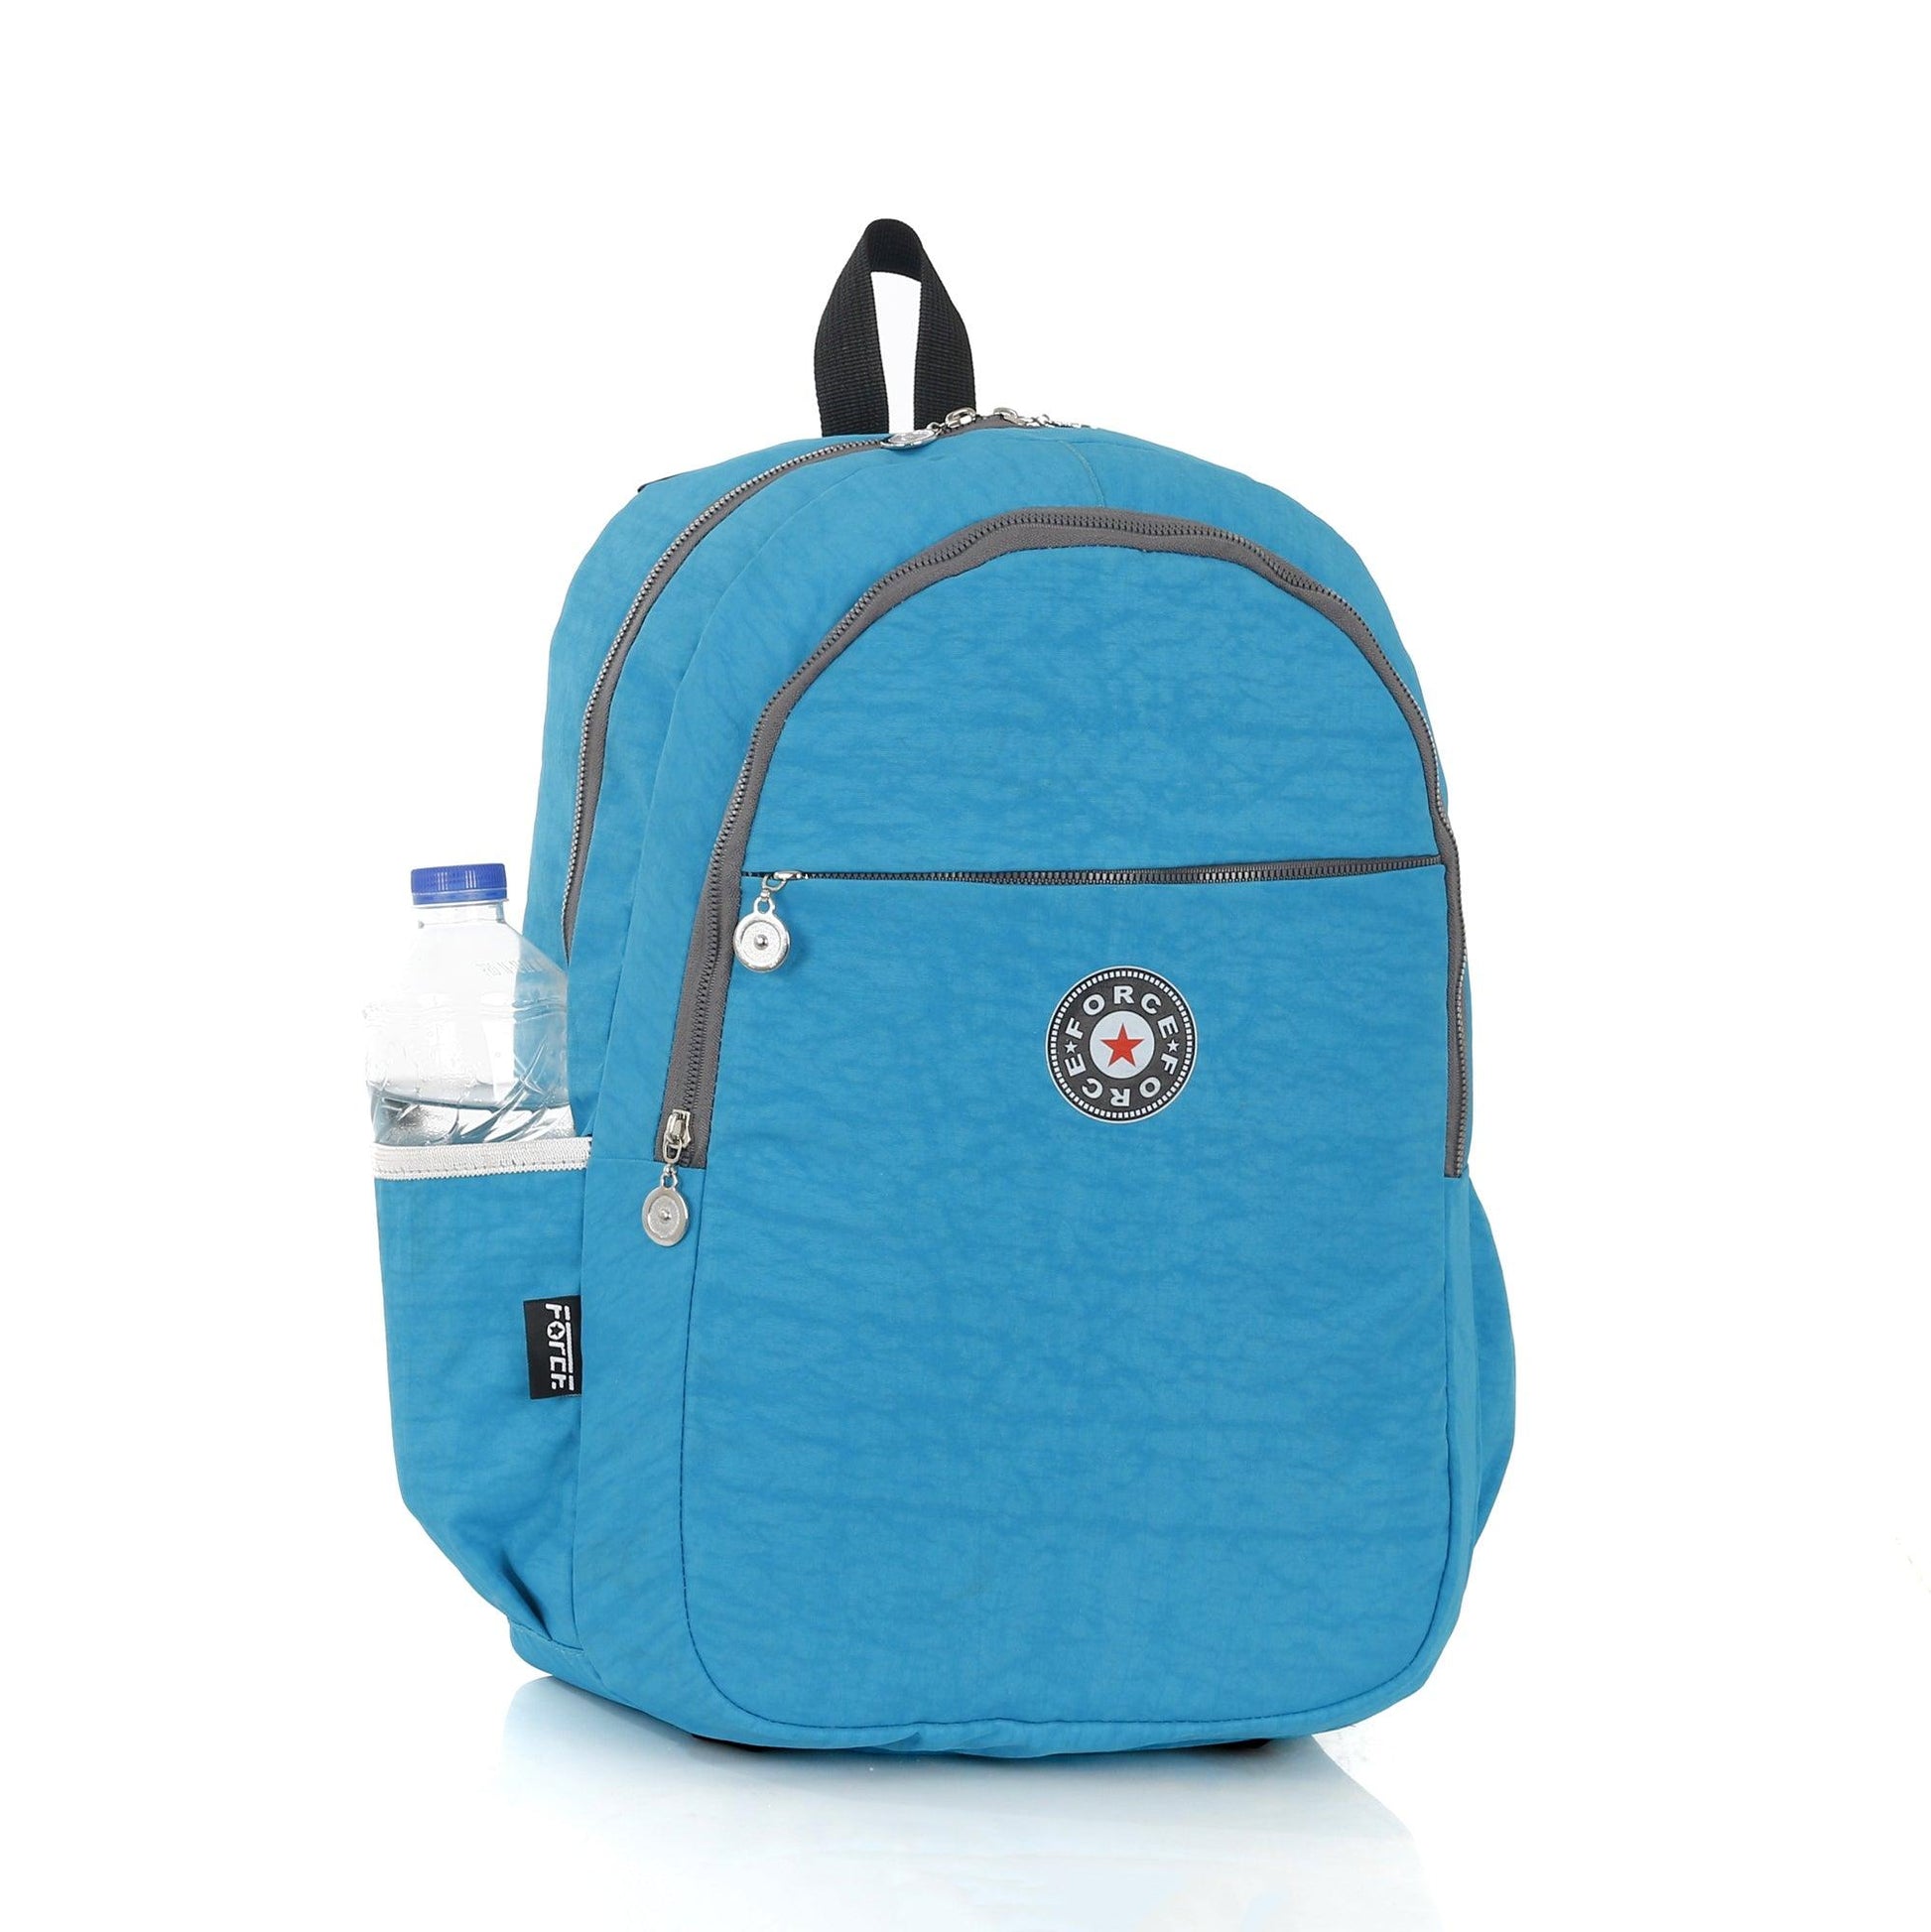 laptop 15.6" Backpack Unisex -terquaz color - new edition - FNE-023 - FORCE STORES